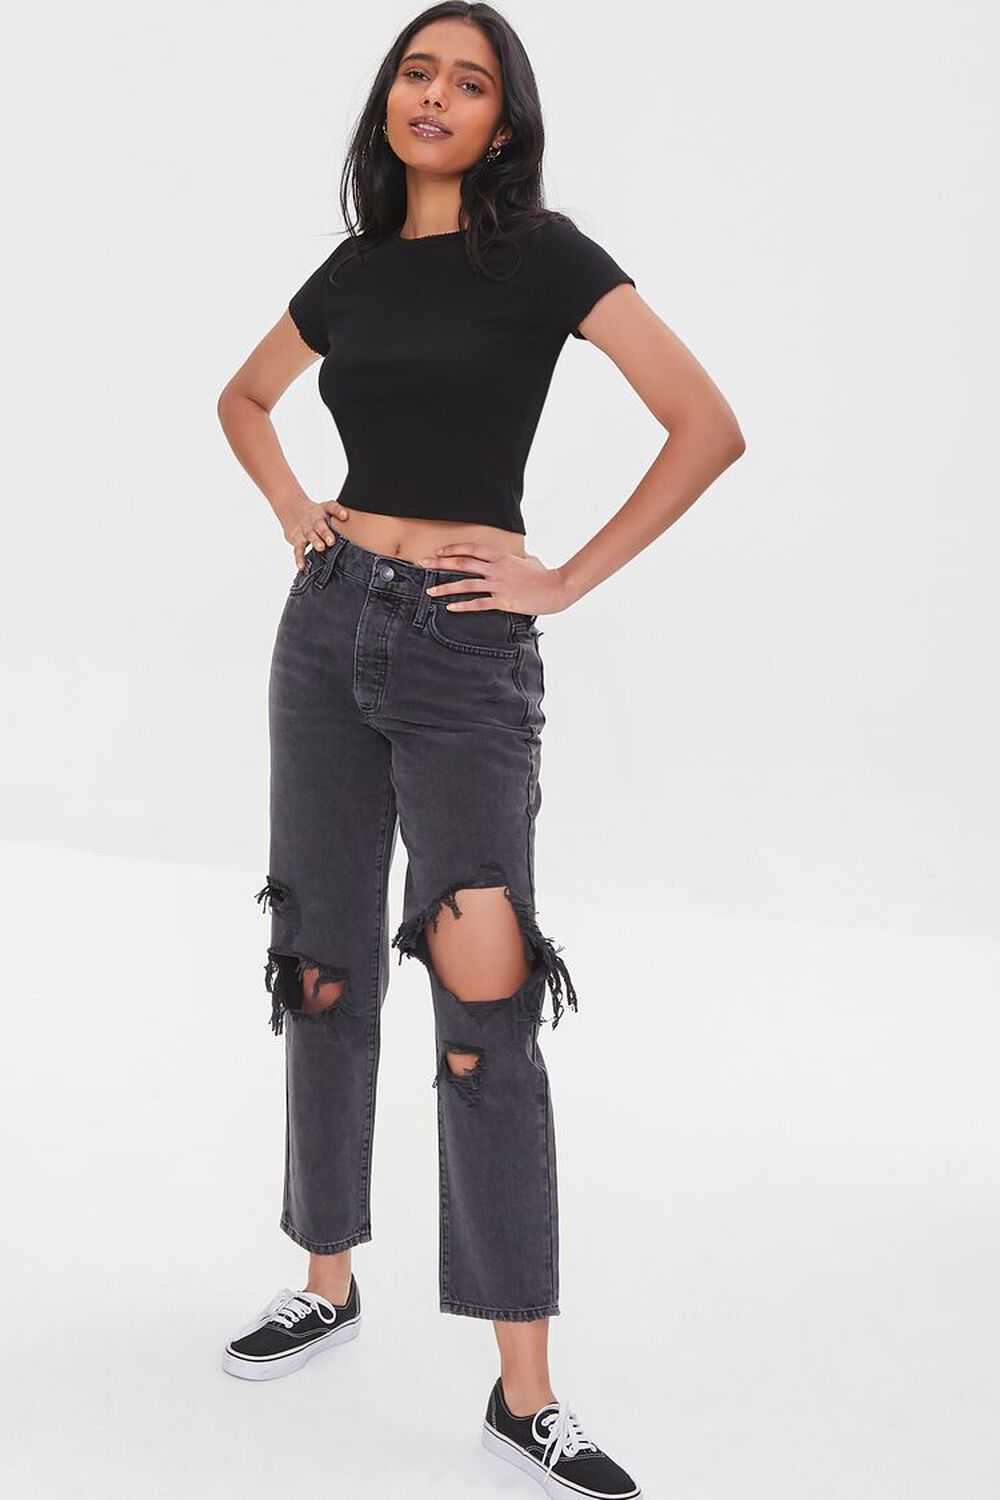 WASHED BLACK Distressed Mom Jeans, image 1